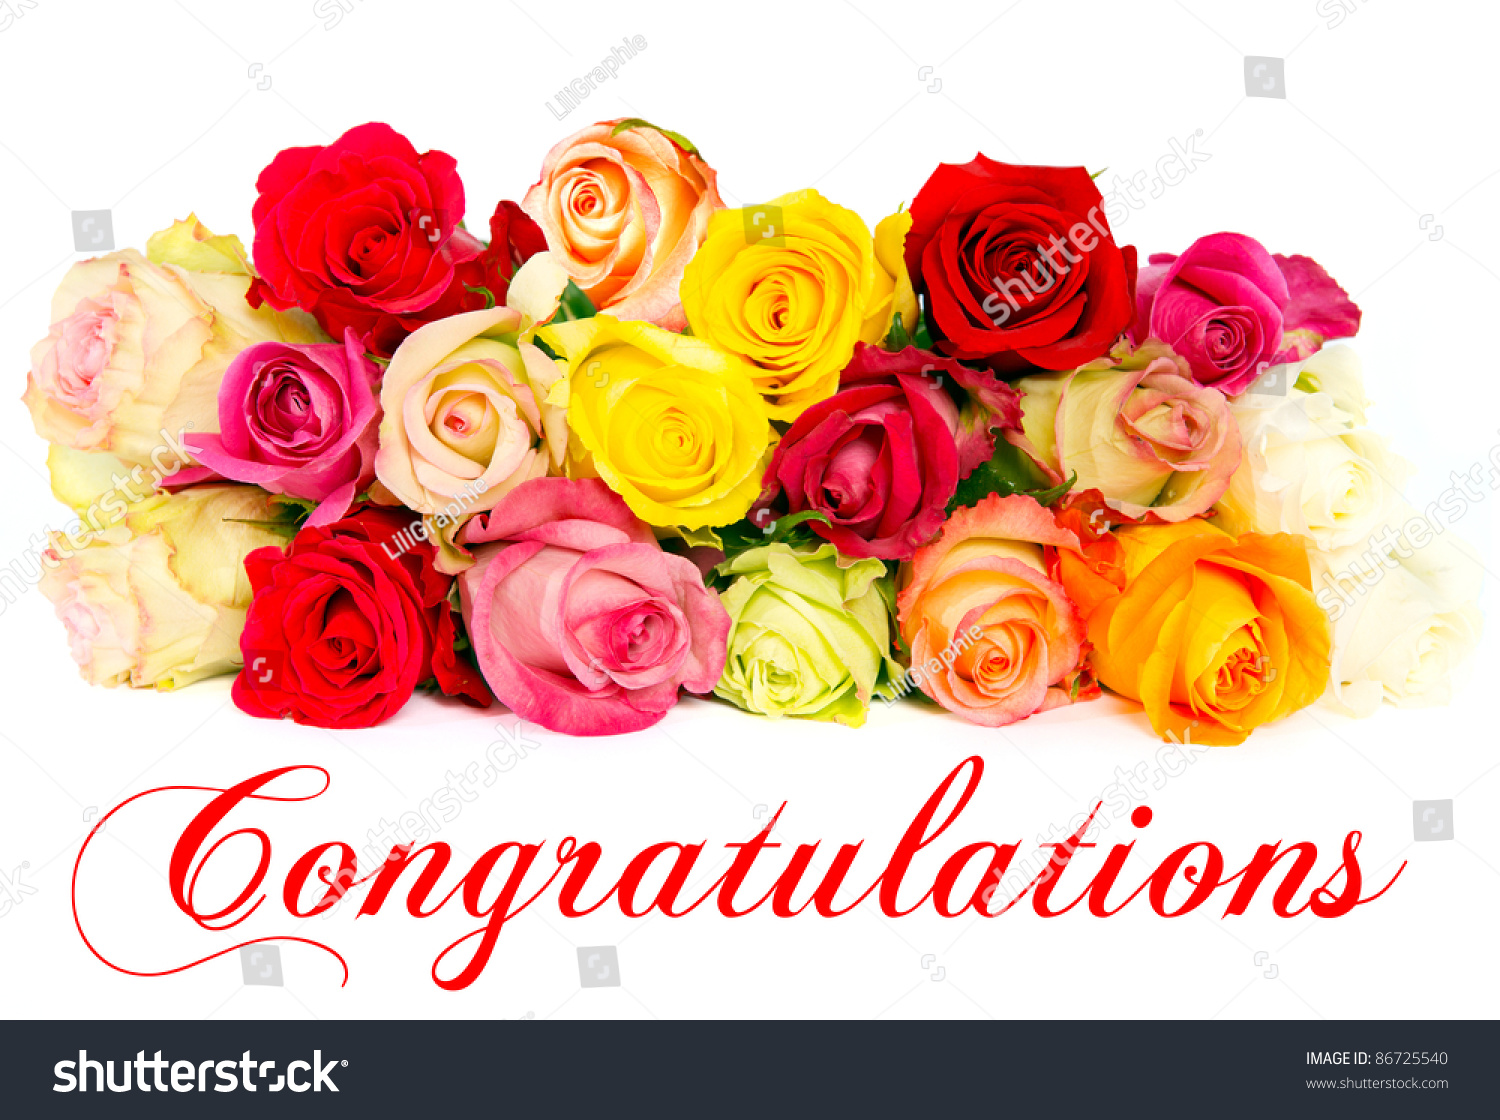 stock photo assorted colorful roses beautiful flowers bouquet congratulations card concept 86725540